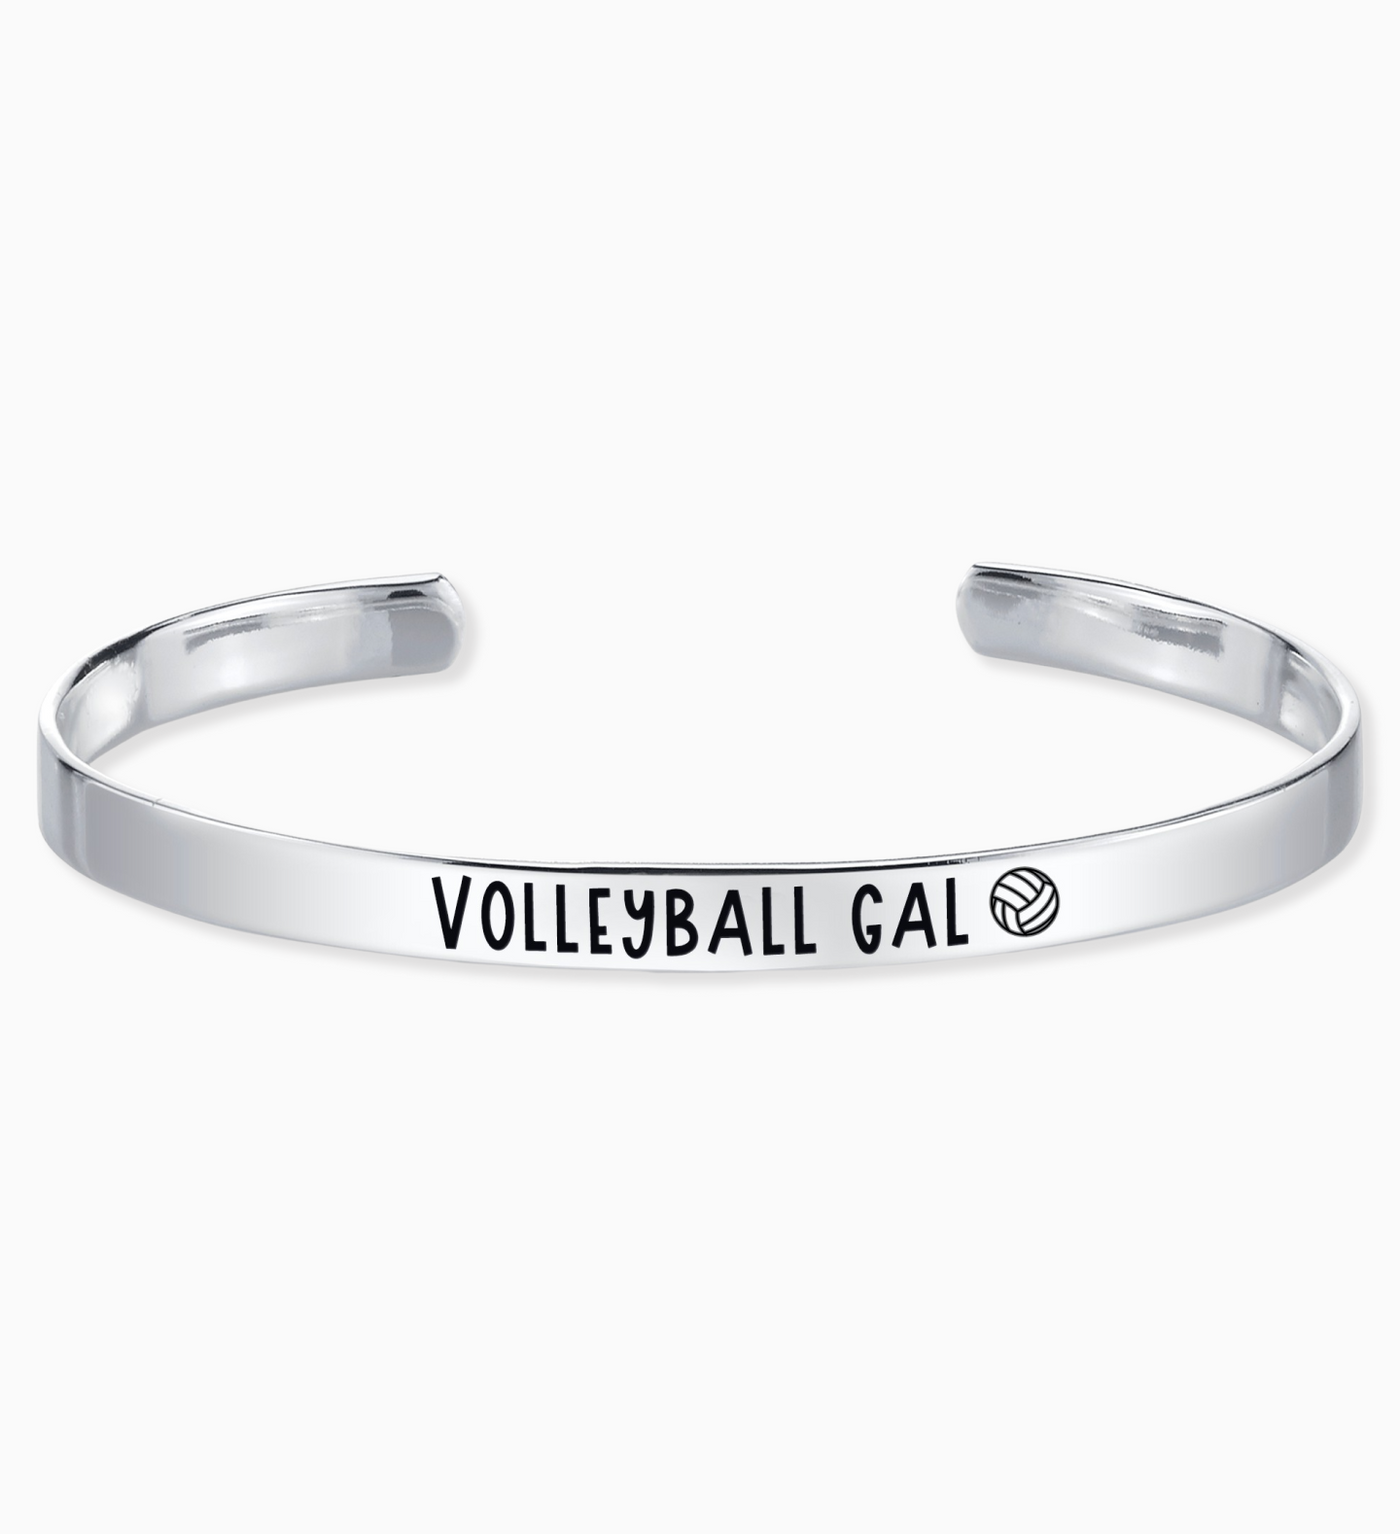 Volleyball Gal - Volleyball Position Engraved Bangle